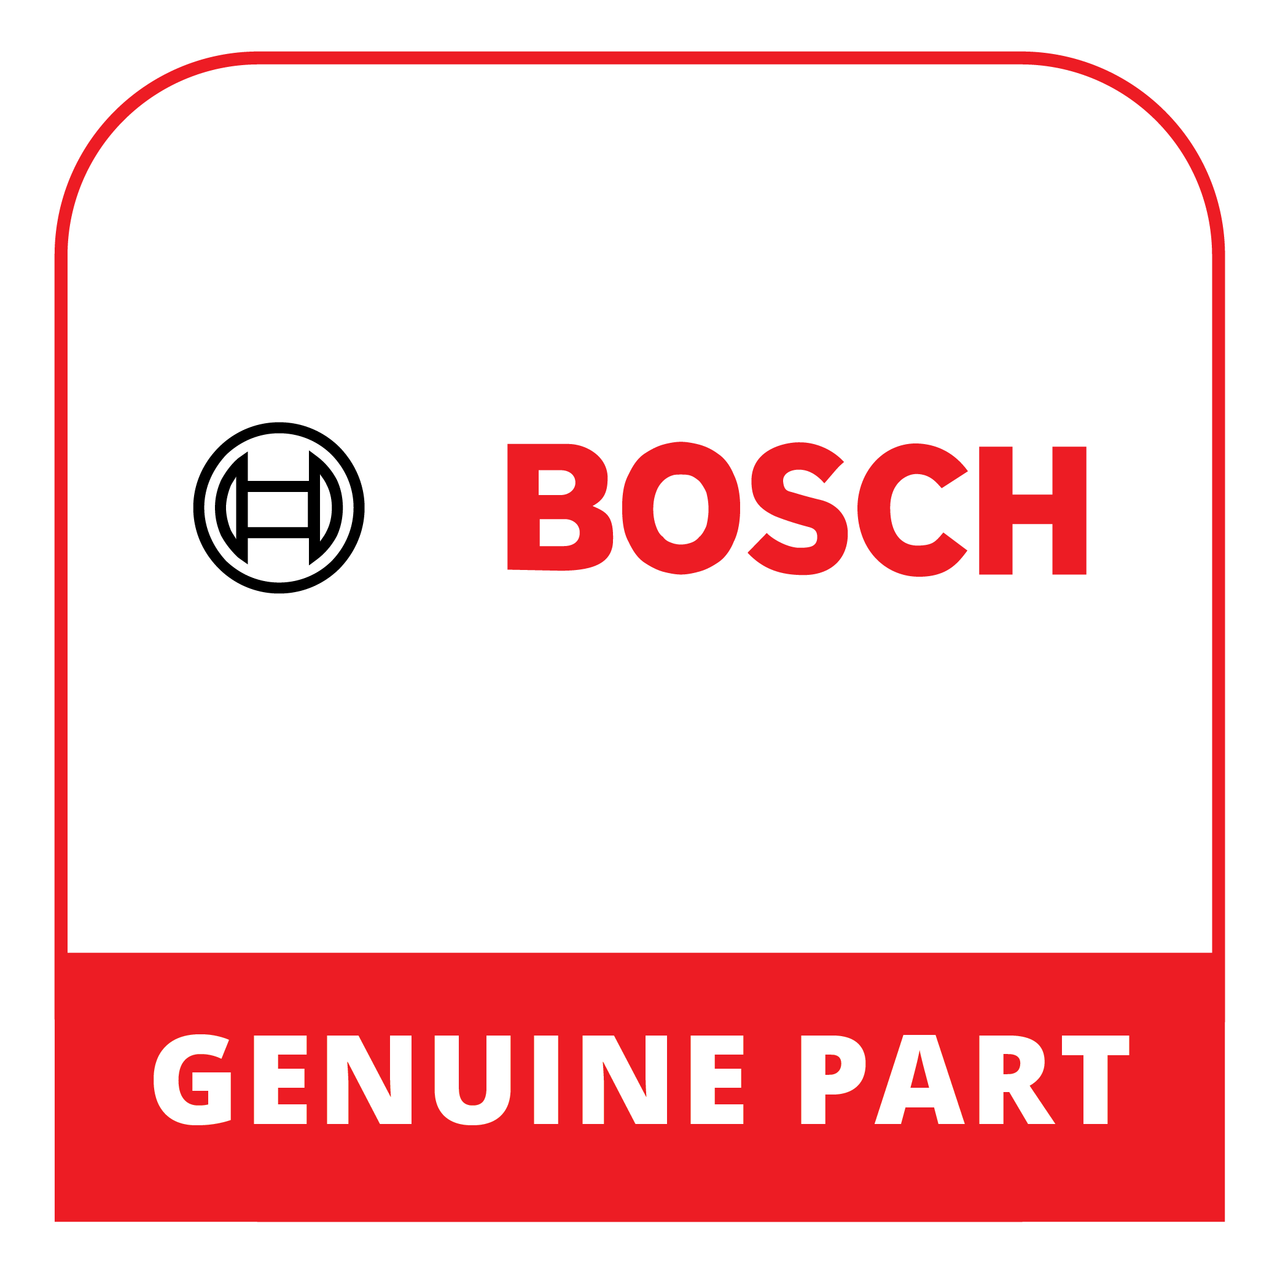 Bosch (Thermador) 18083928 - Installation Instructions - Genuine Bosch (Thermador) Part